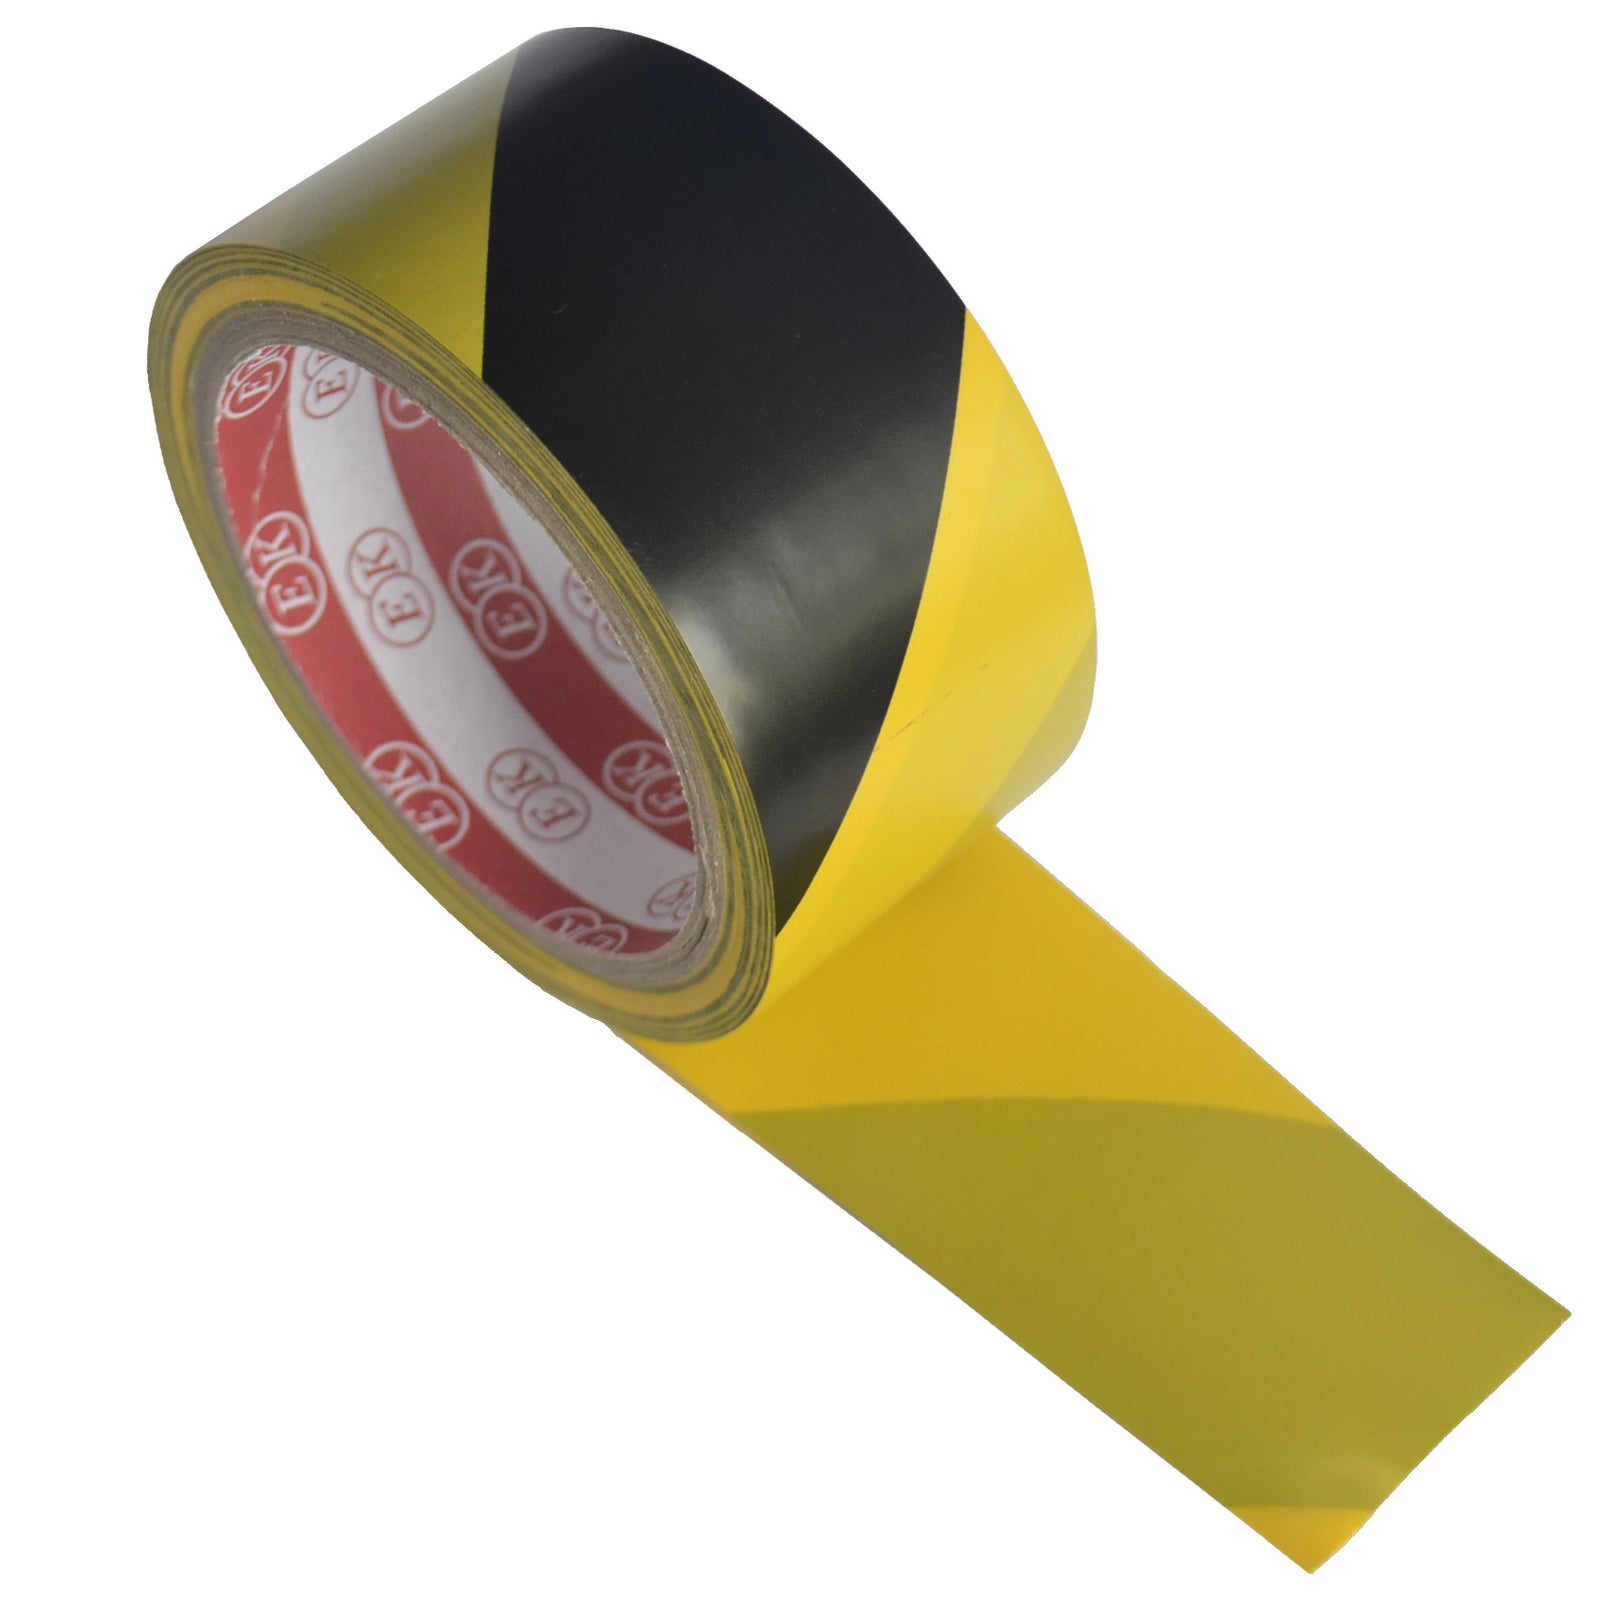 High Strength Adhesive Single-Sided Black and Yellow Standard Hazard Safety Warning Floor Tape for Social Distance, Strong and Water Resistant Tape (4.5cm x 17 meters)